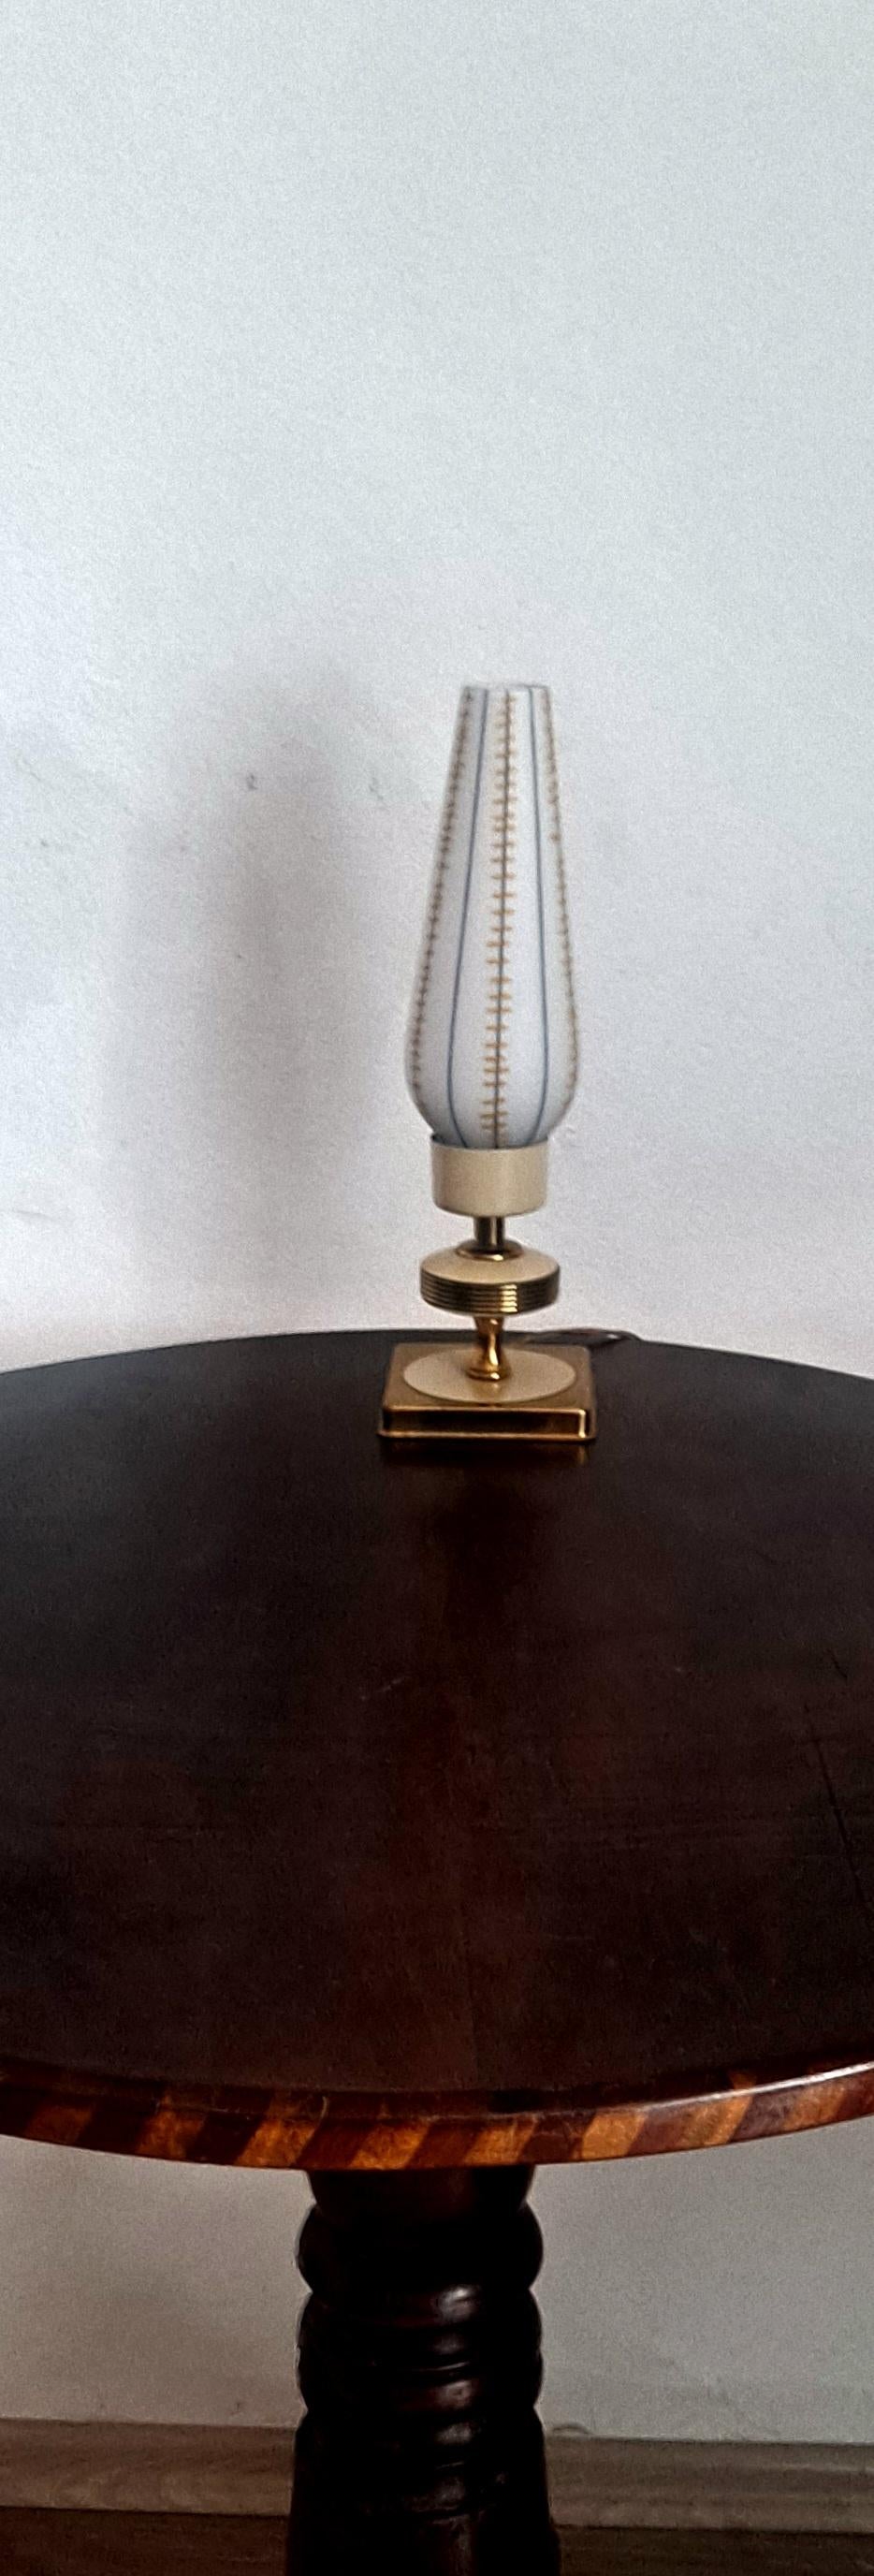 Table lamp from the 1950 s. Brass base and Murano ribbed glass.
glass shade produce plenty of good light in the room. 